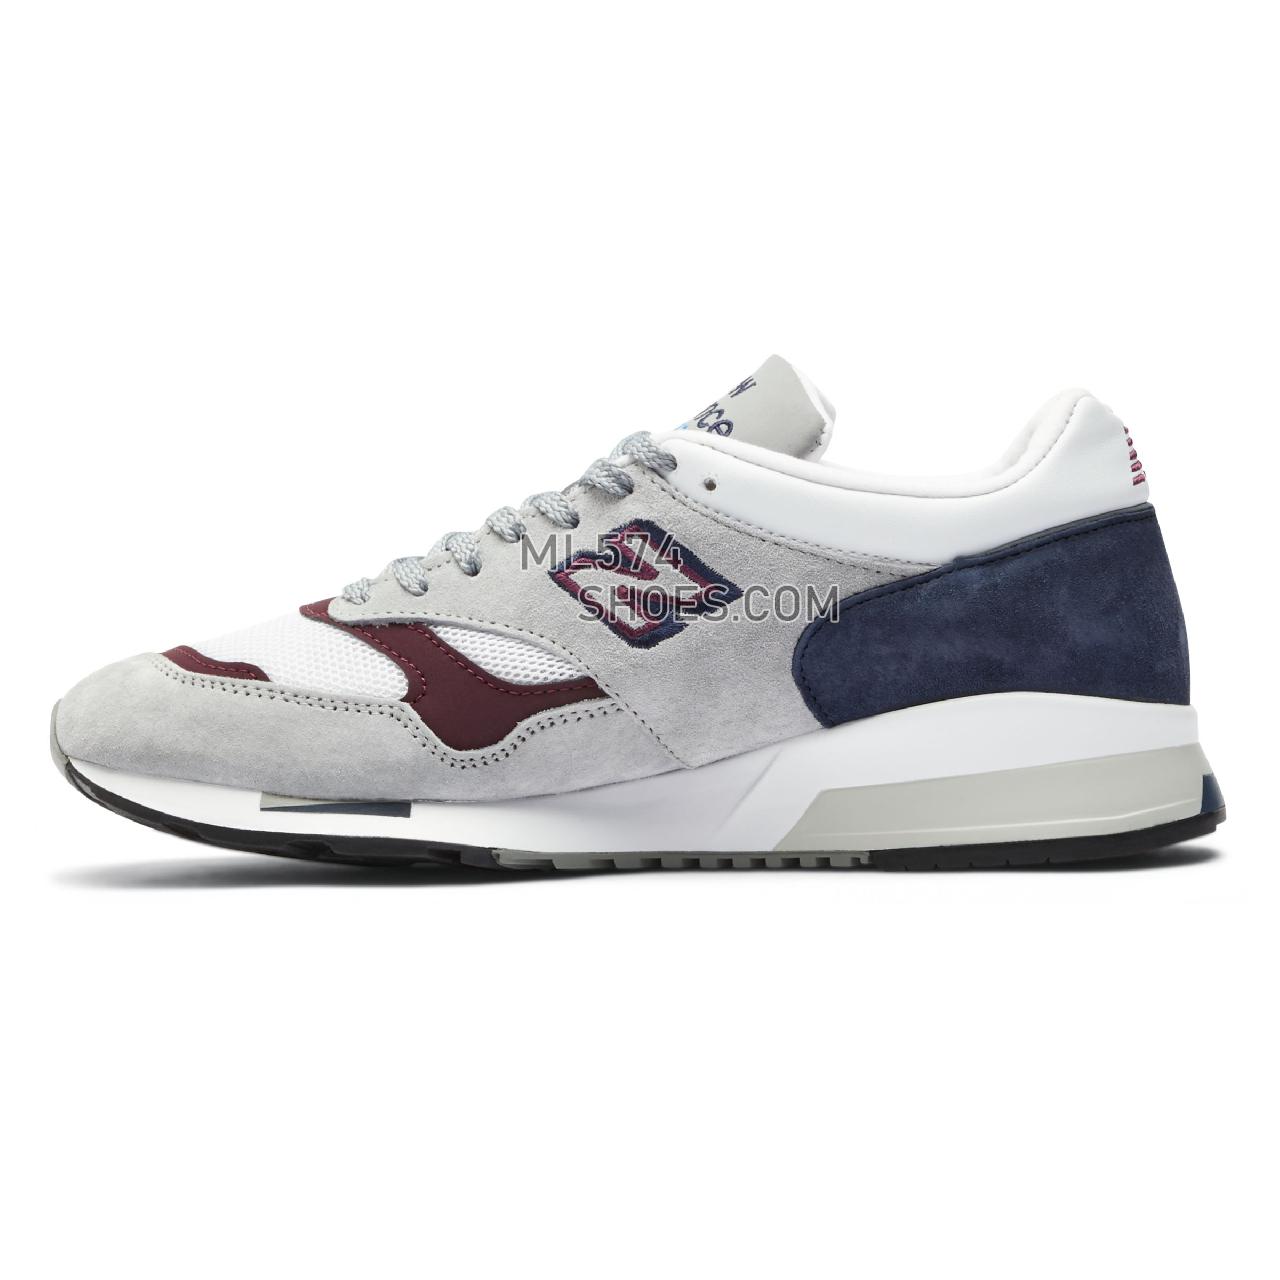 New Balance MADE in UK 1500 - Men's Made in USA And UK Sneakers - Grey with navy and white - M1500NBR